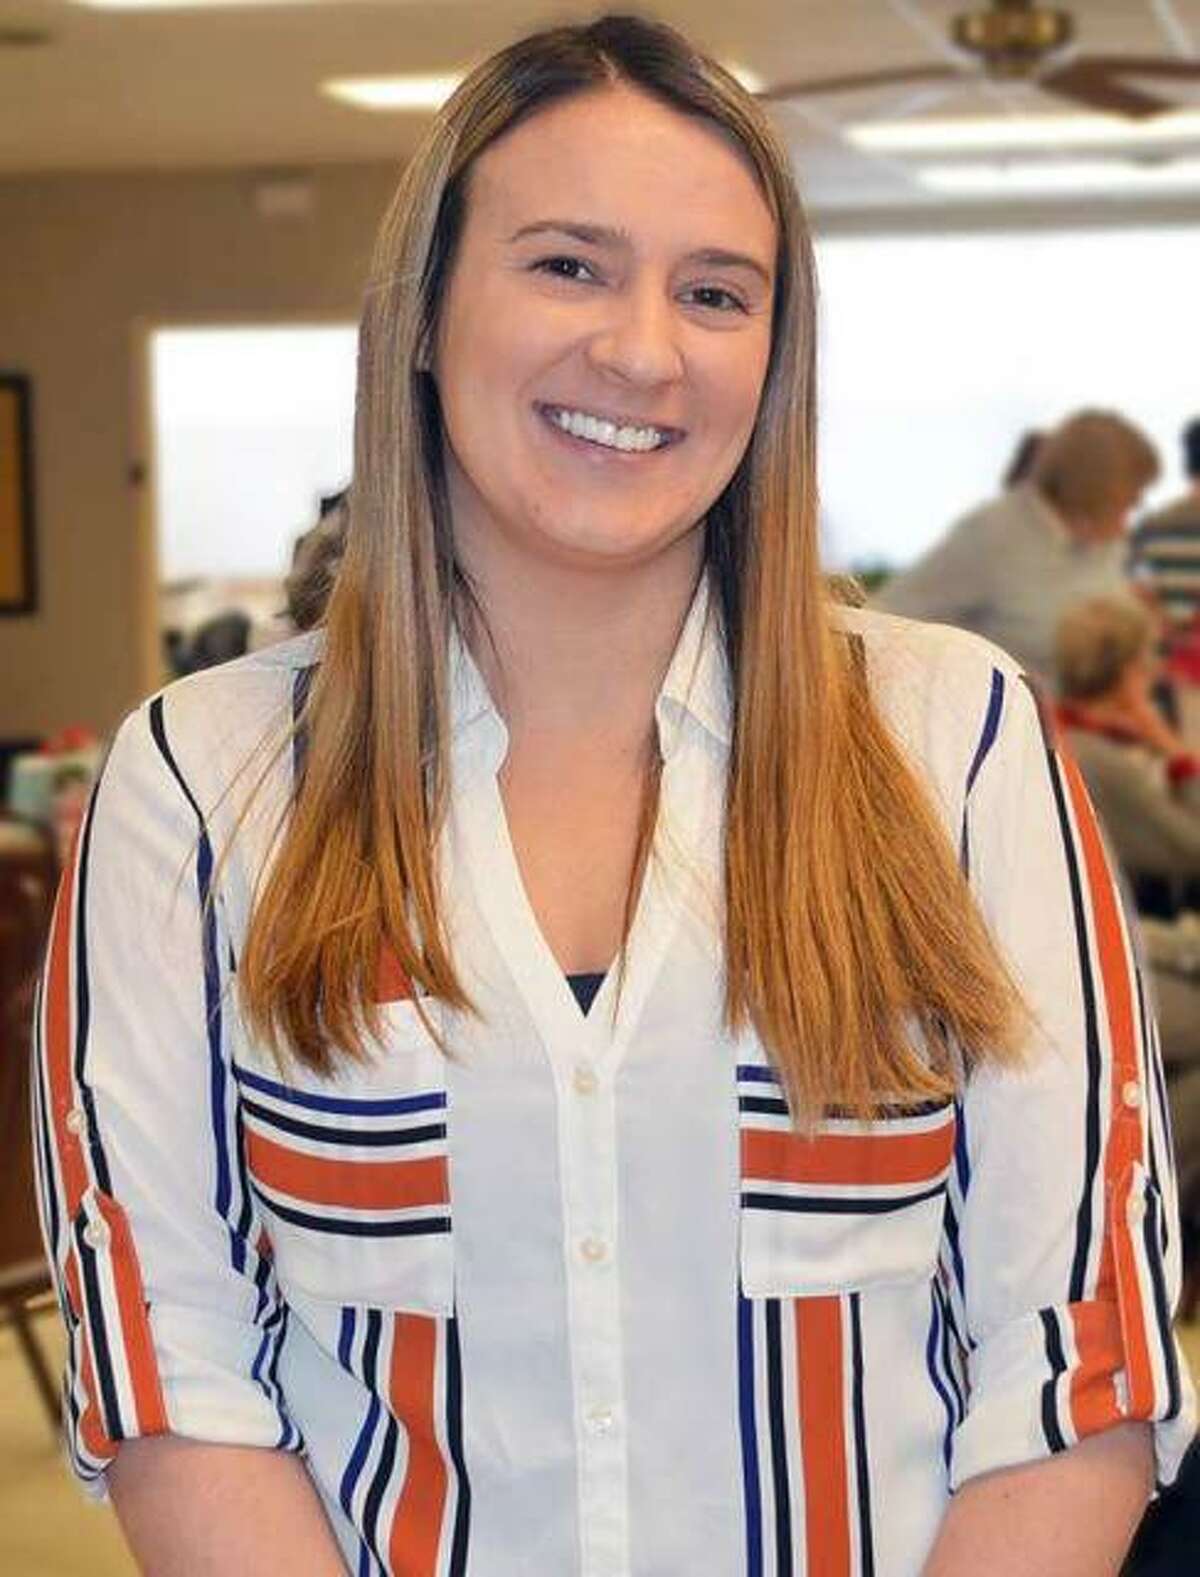 Angela Fraley has been promoted from program coordinator to assistant director at Main Street Community Center. In her new role, Fraley will oversee the center’s six program areas as well as serve as volunteer coordinator.